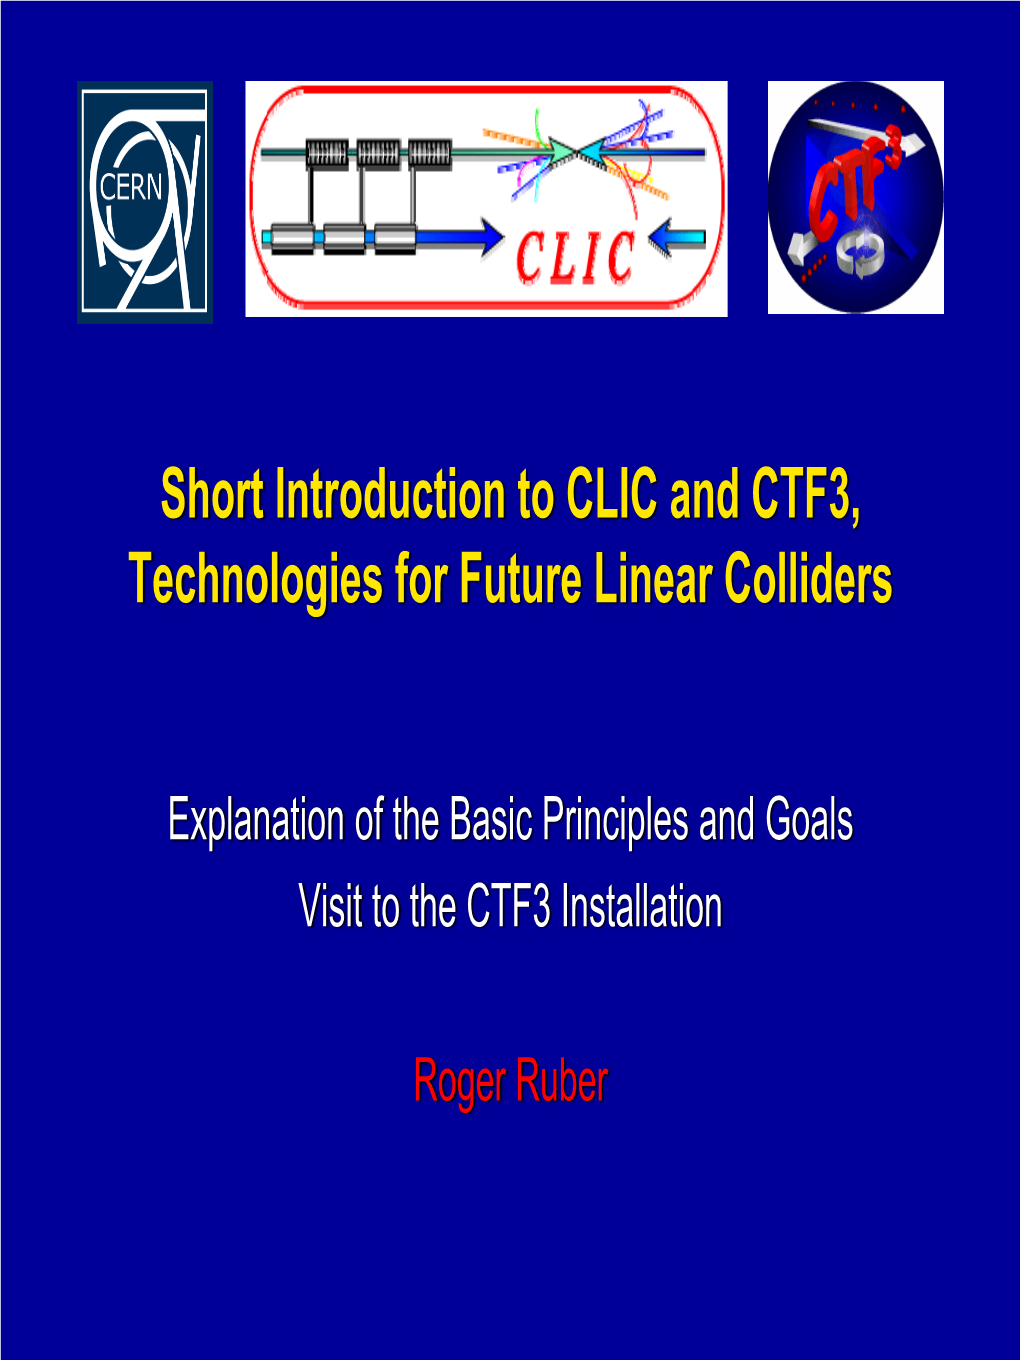 Short Introduction to CLIC and CTF3, Technologies for Future Linear Colliders